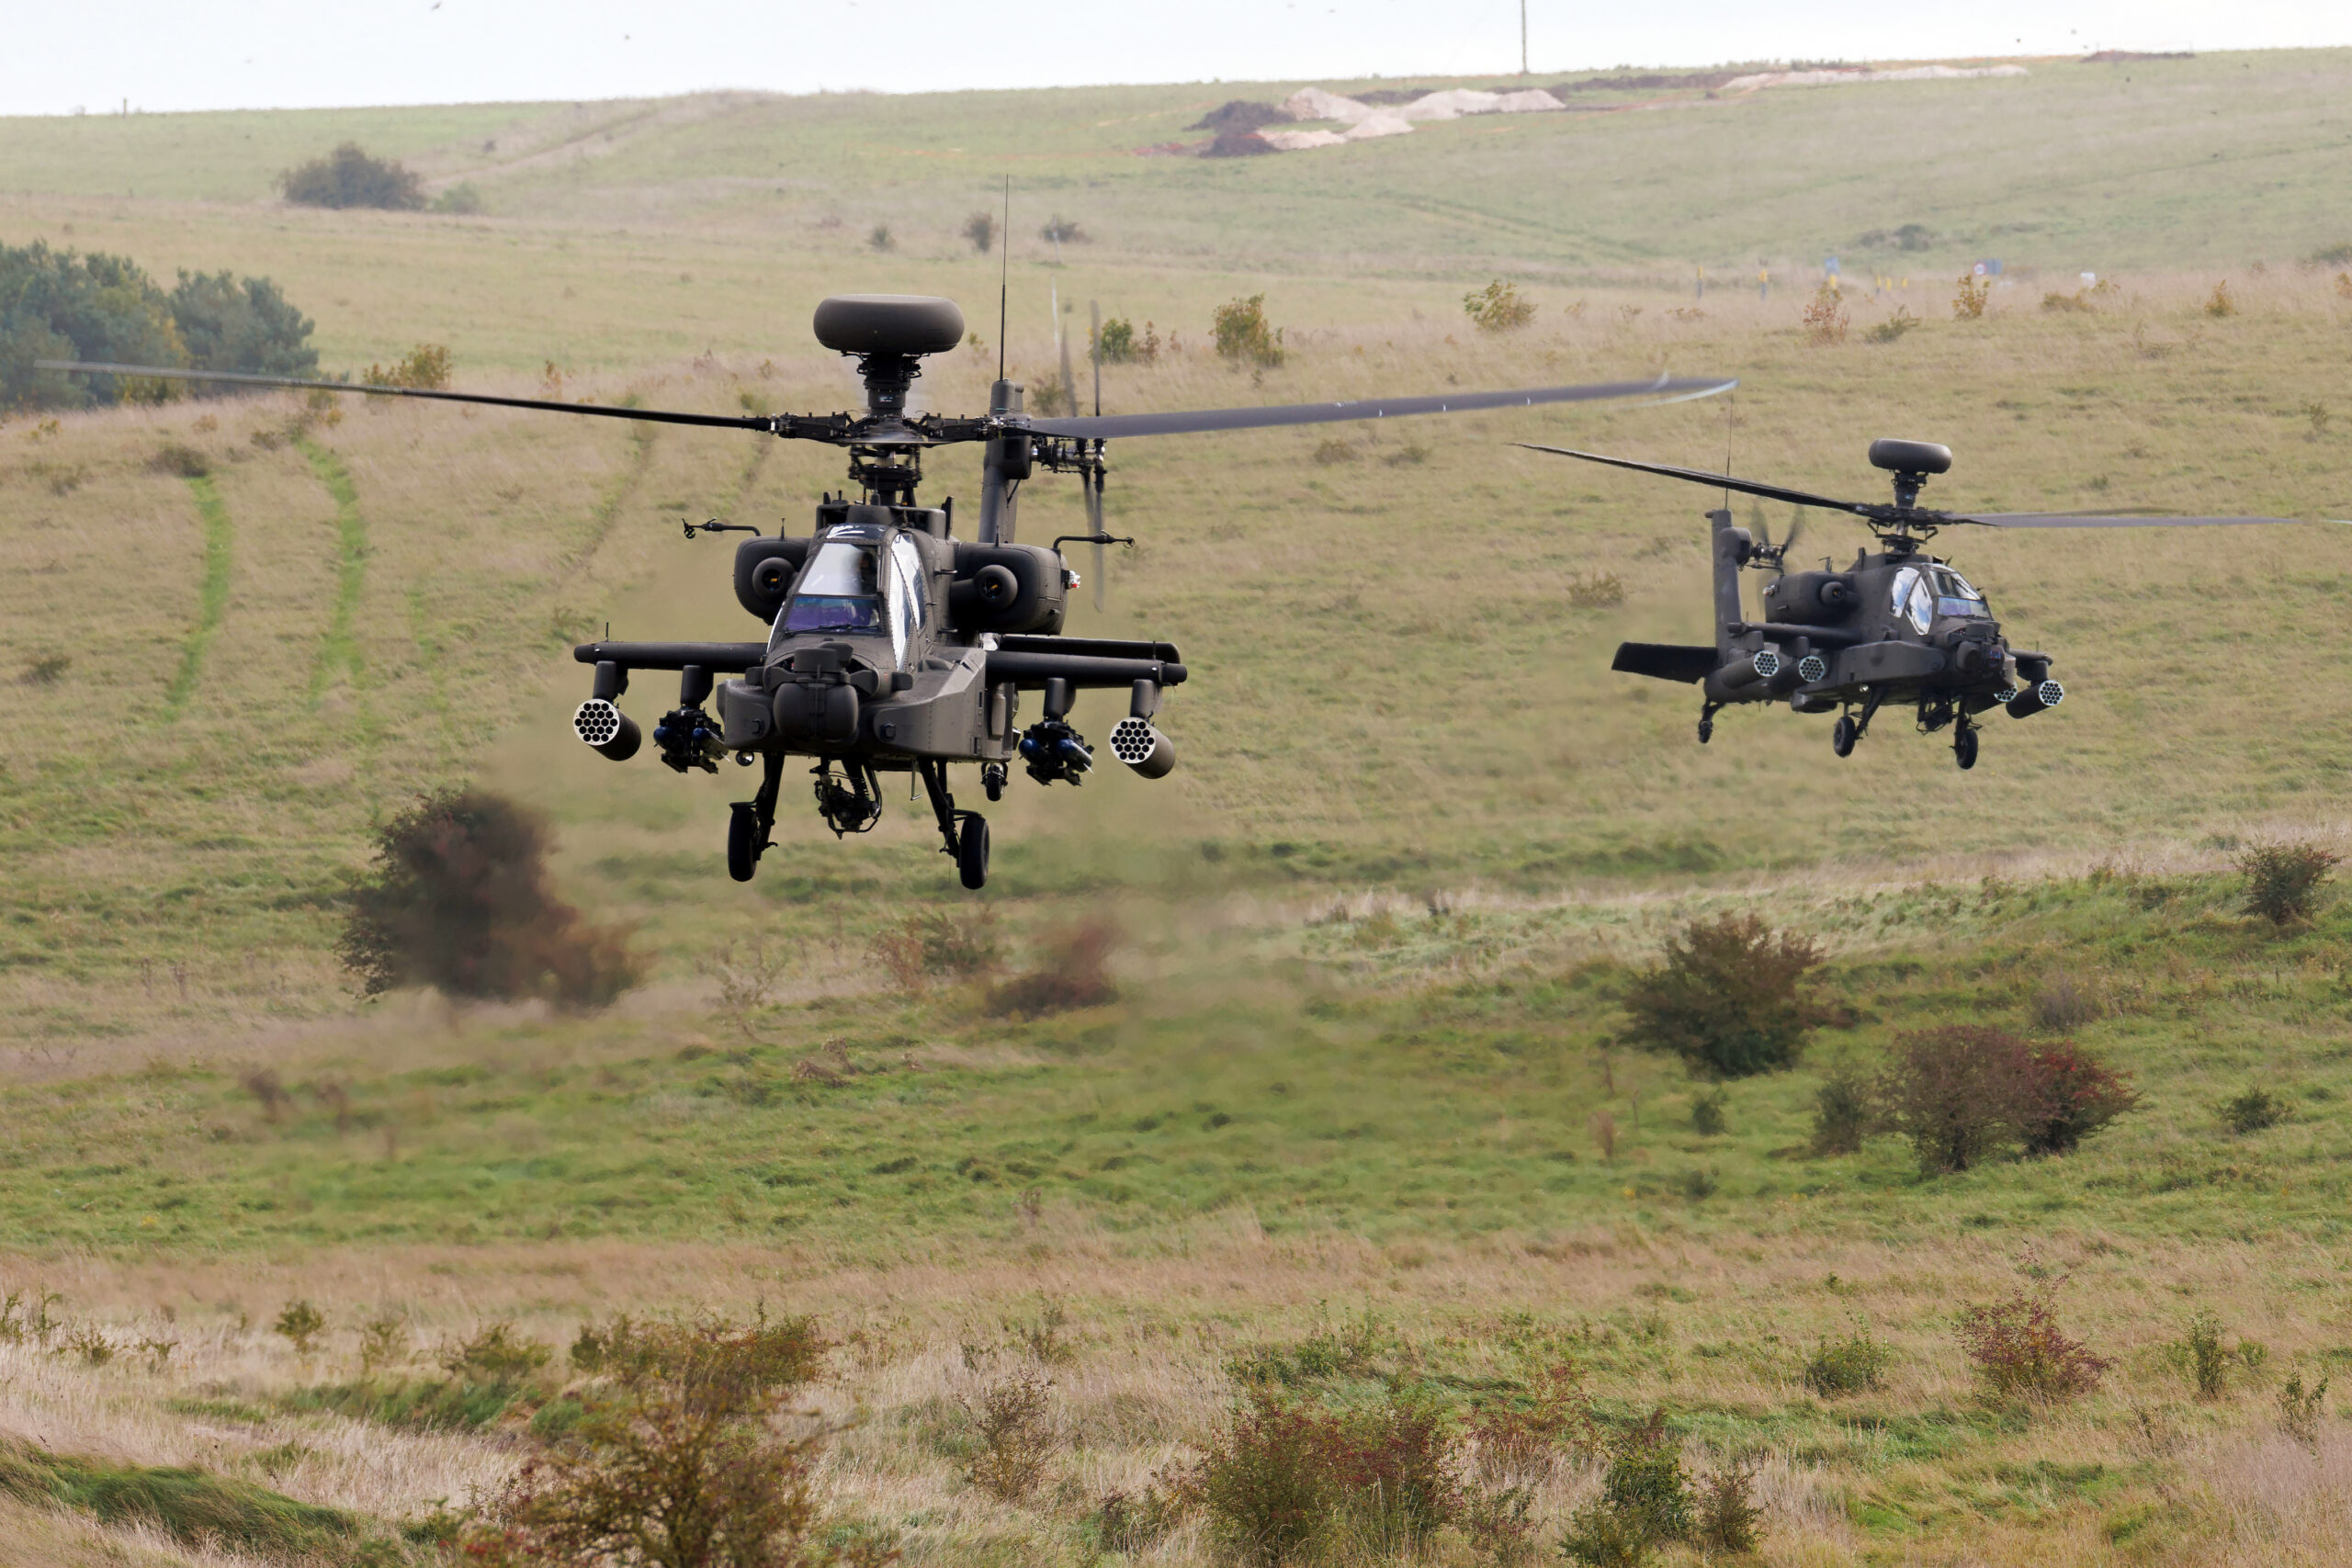 AH-64E attack helicopter